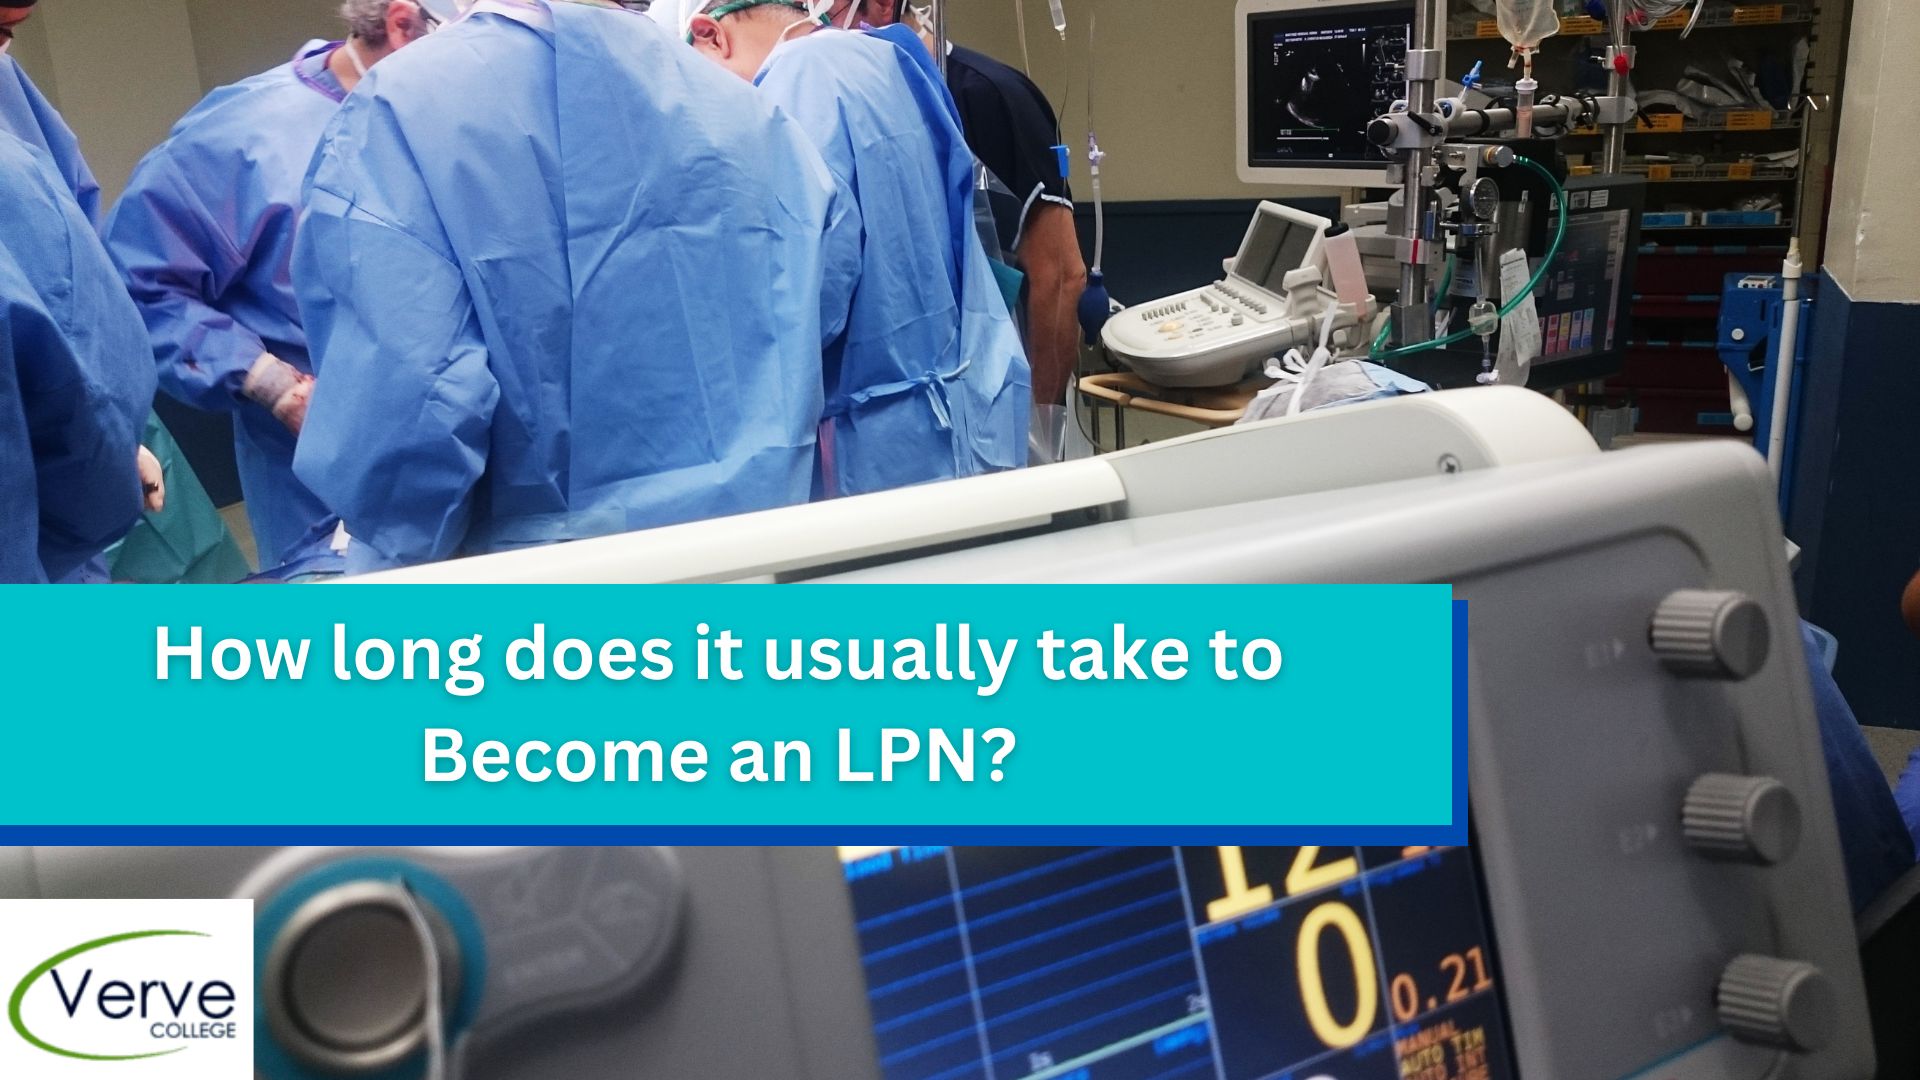 How Long does it Usually take to Become an LPN?